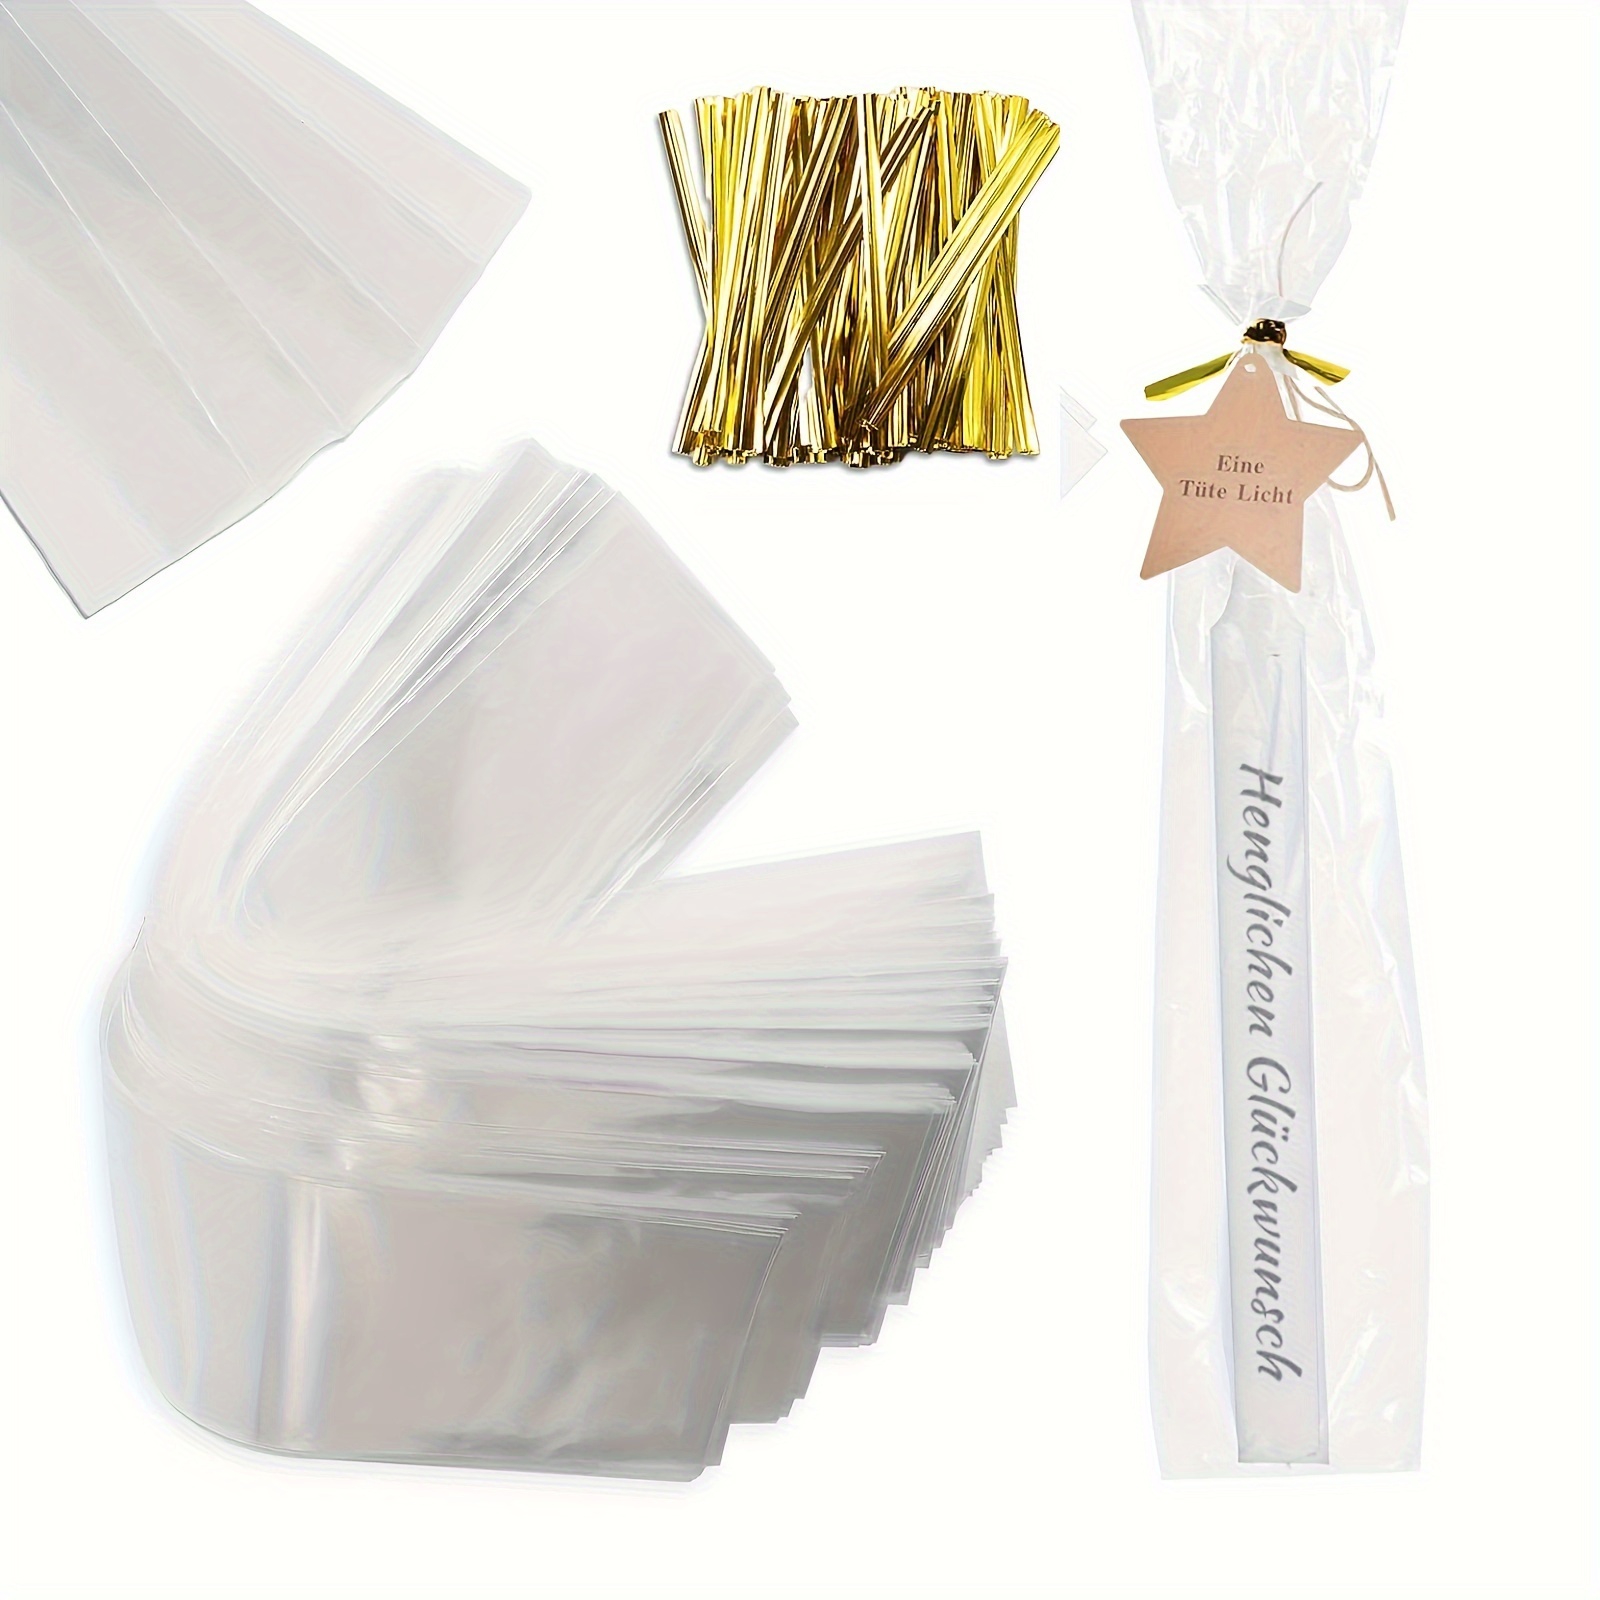 

100pcs Clear Bags For Candles Clear Long Cello Cellophane Treat Bags With 100pcs Metallic Twist Ties For Christmas Birthday Party Valentine's Day Wedding Gifts